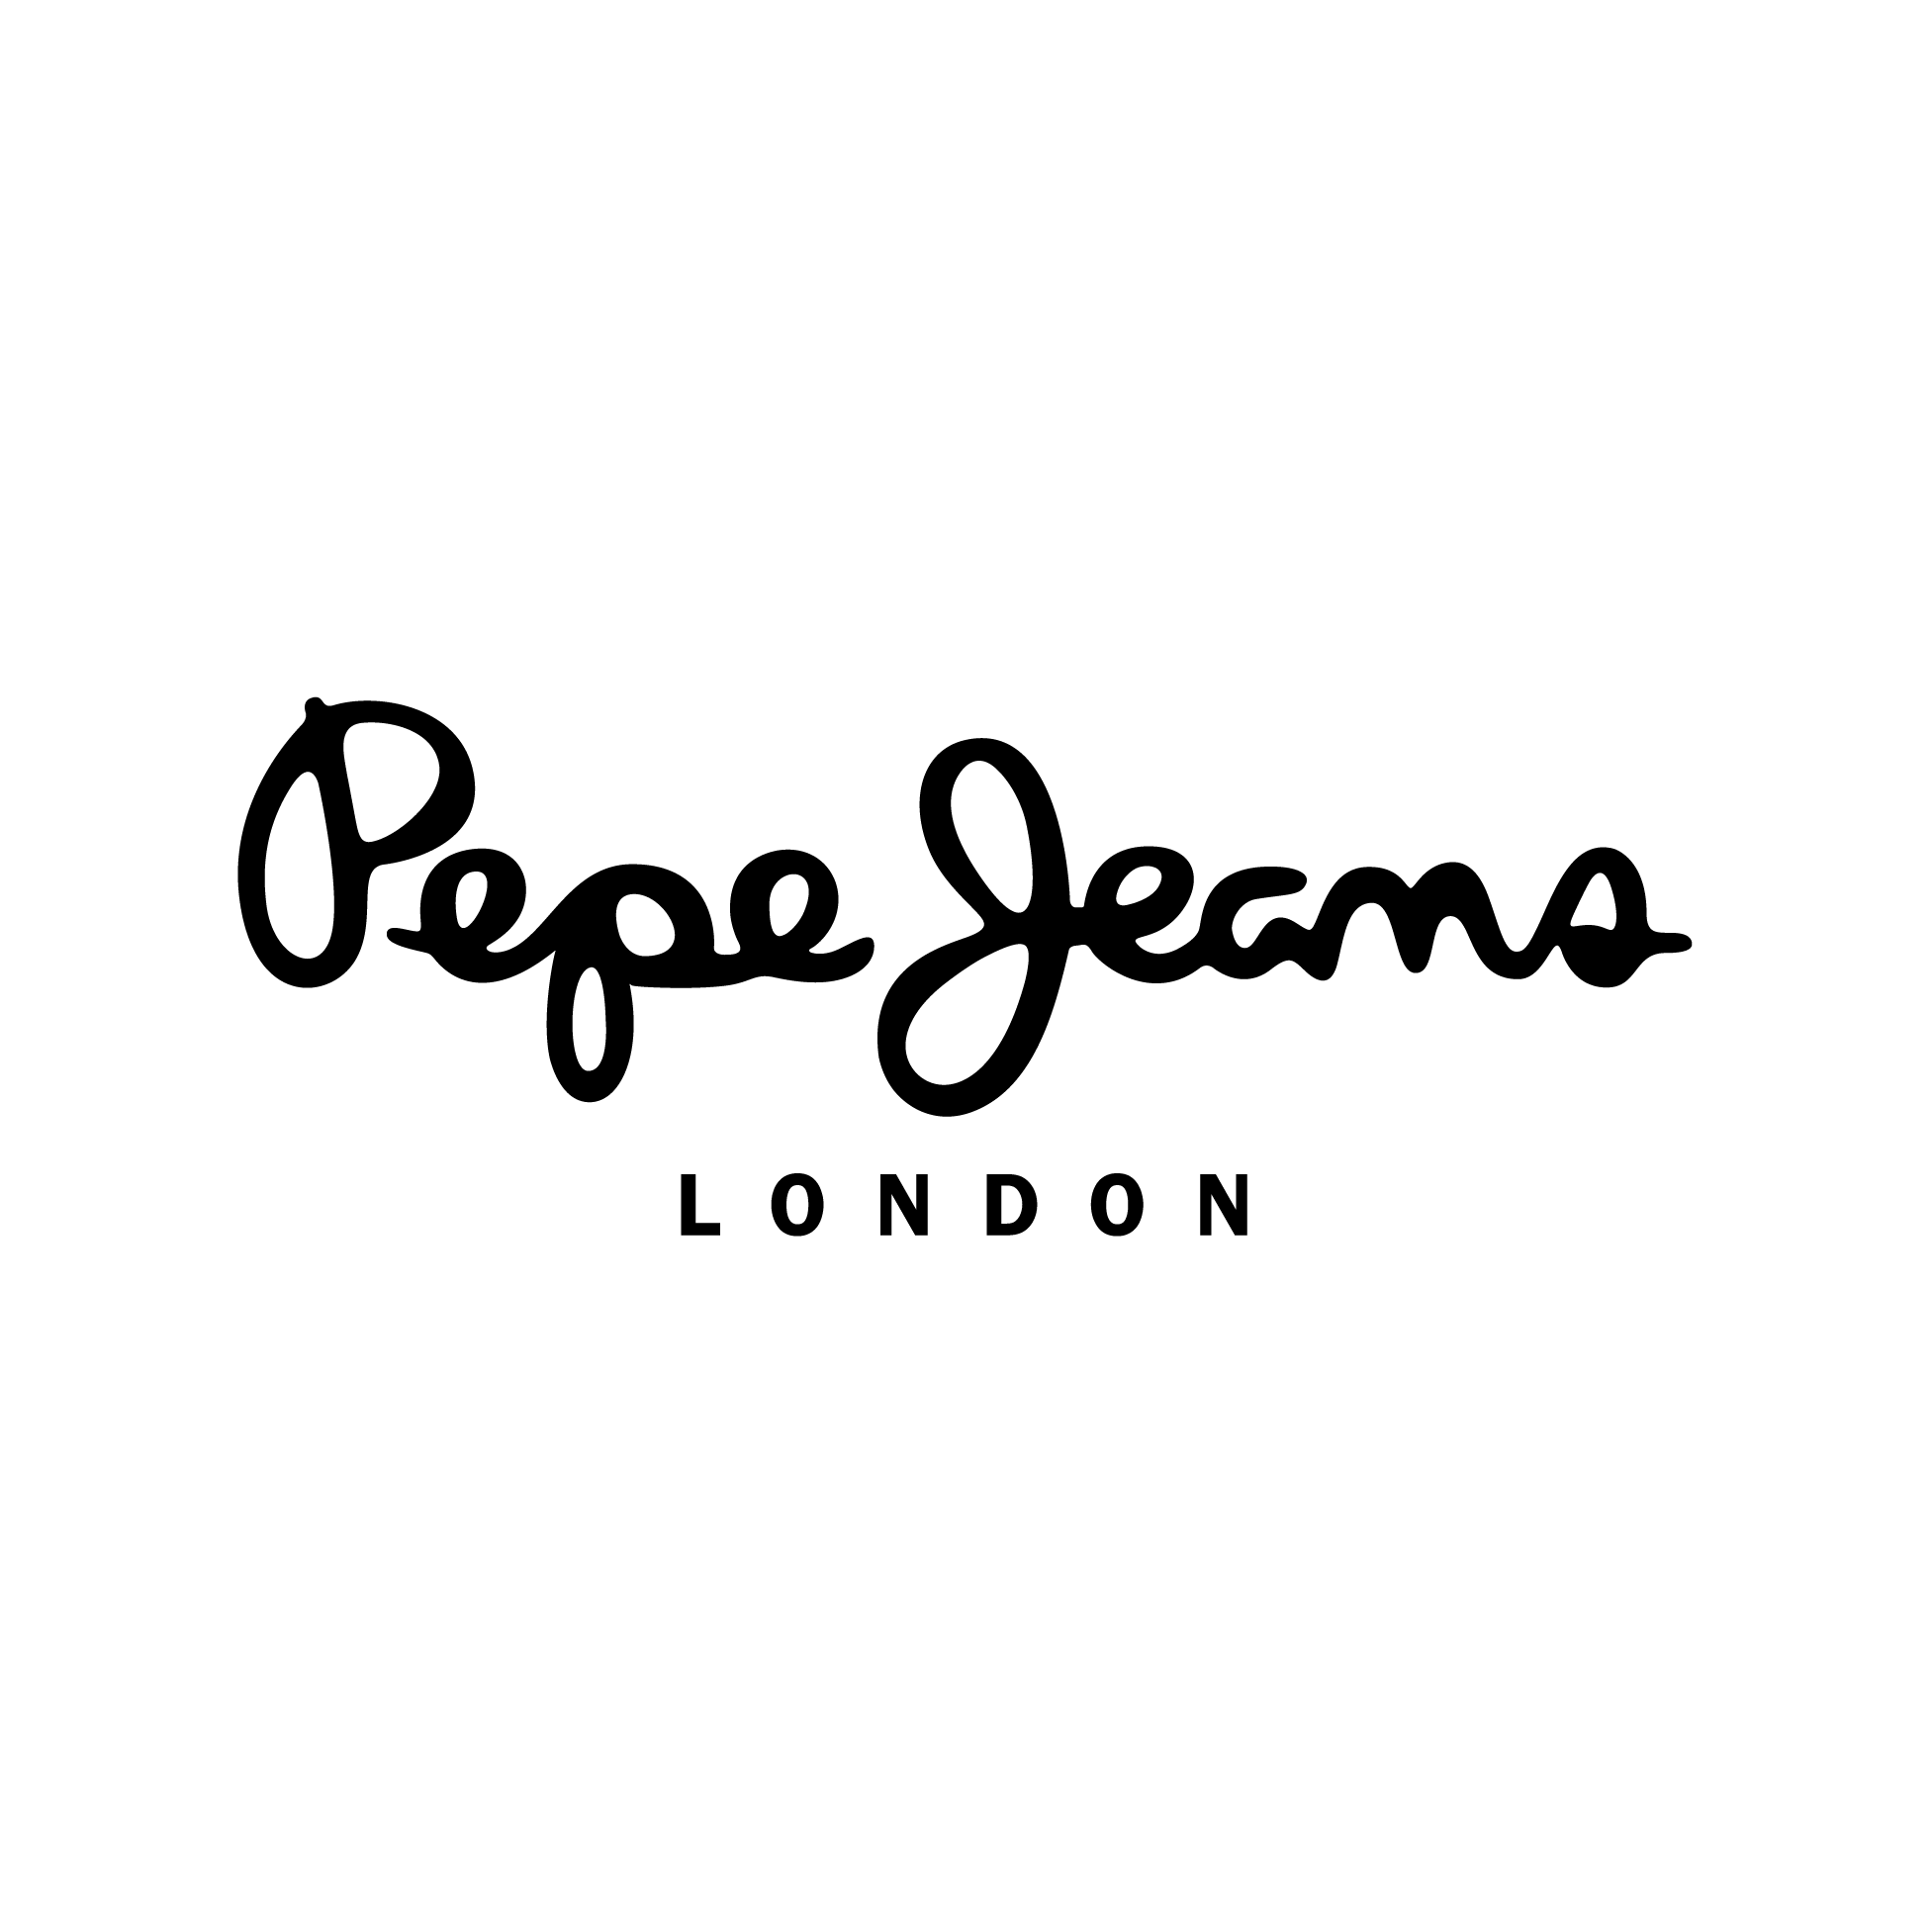 Pepe Jeans Cascais Shopping (CLOSED)